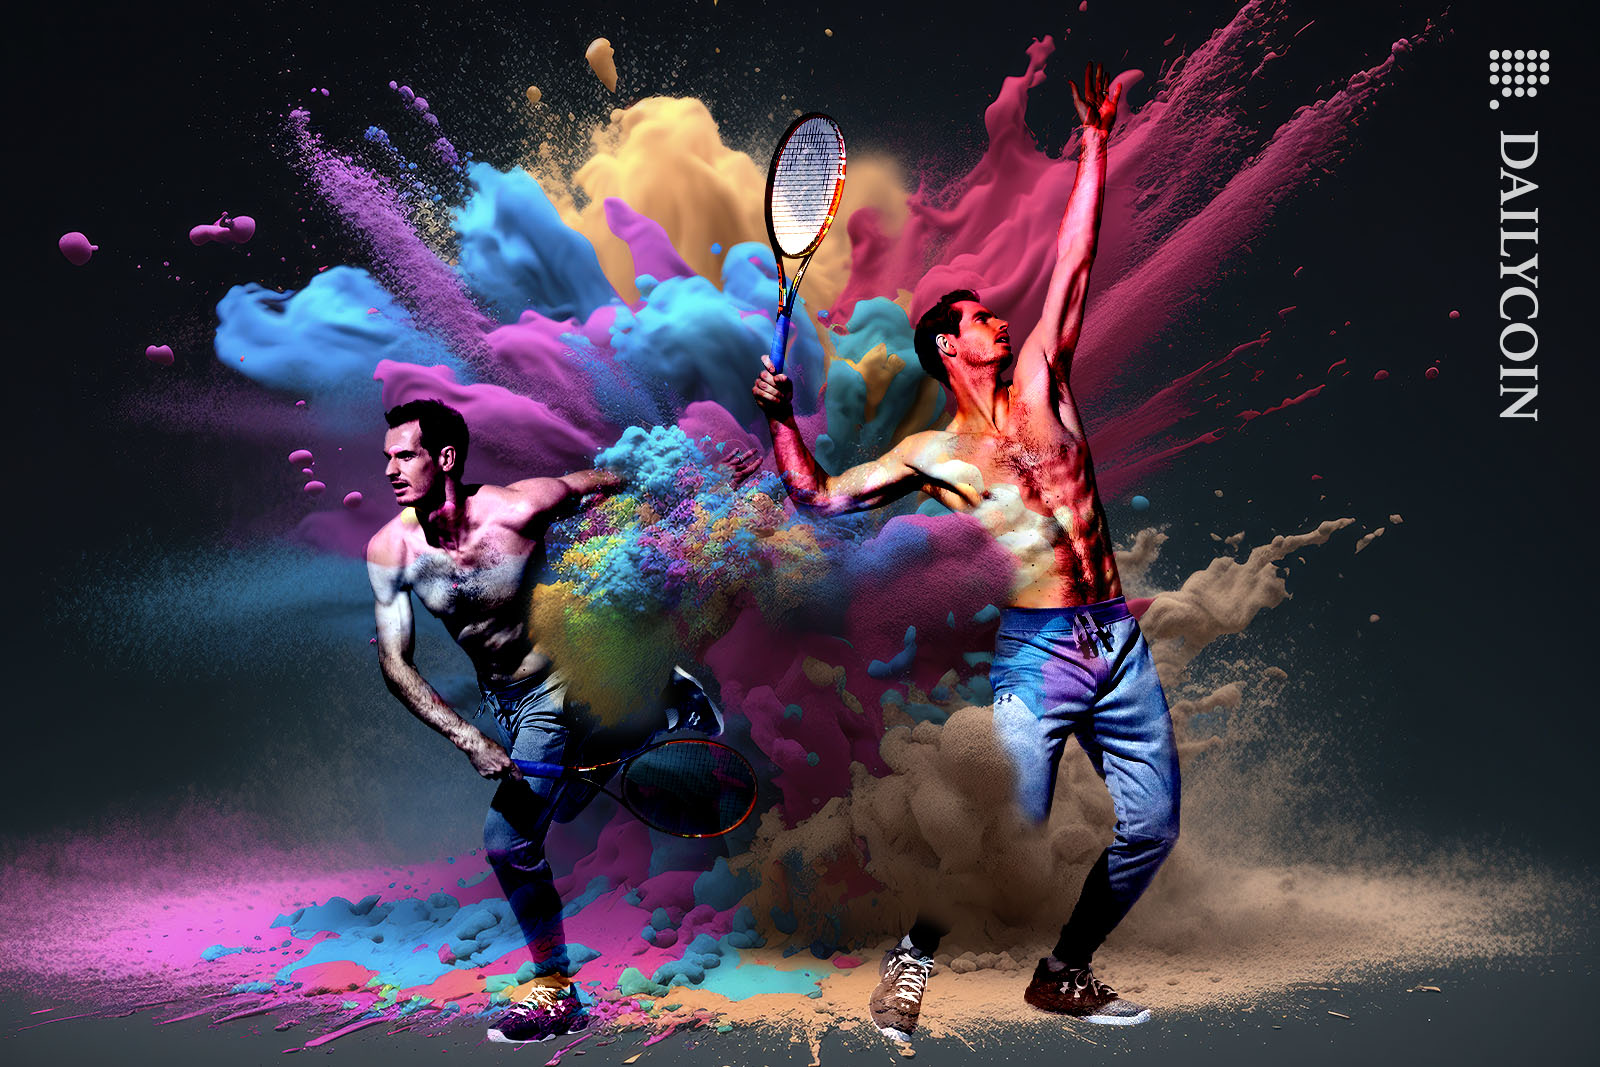 Andy Murray playing tennis in a colourful dust explosion.